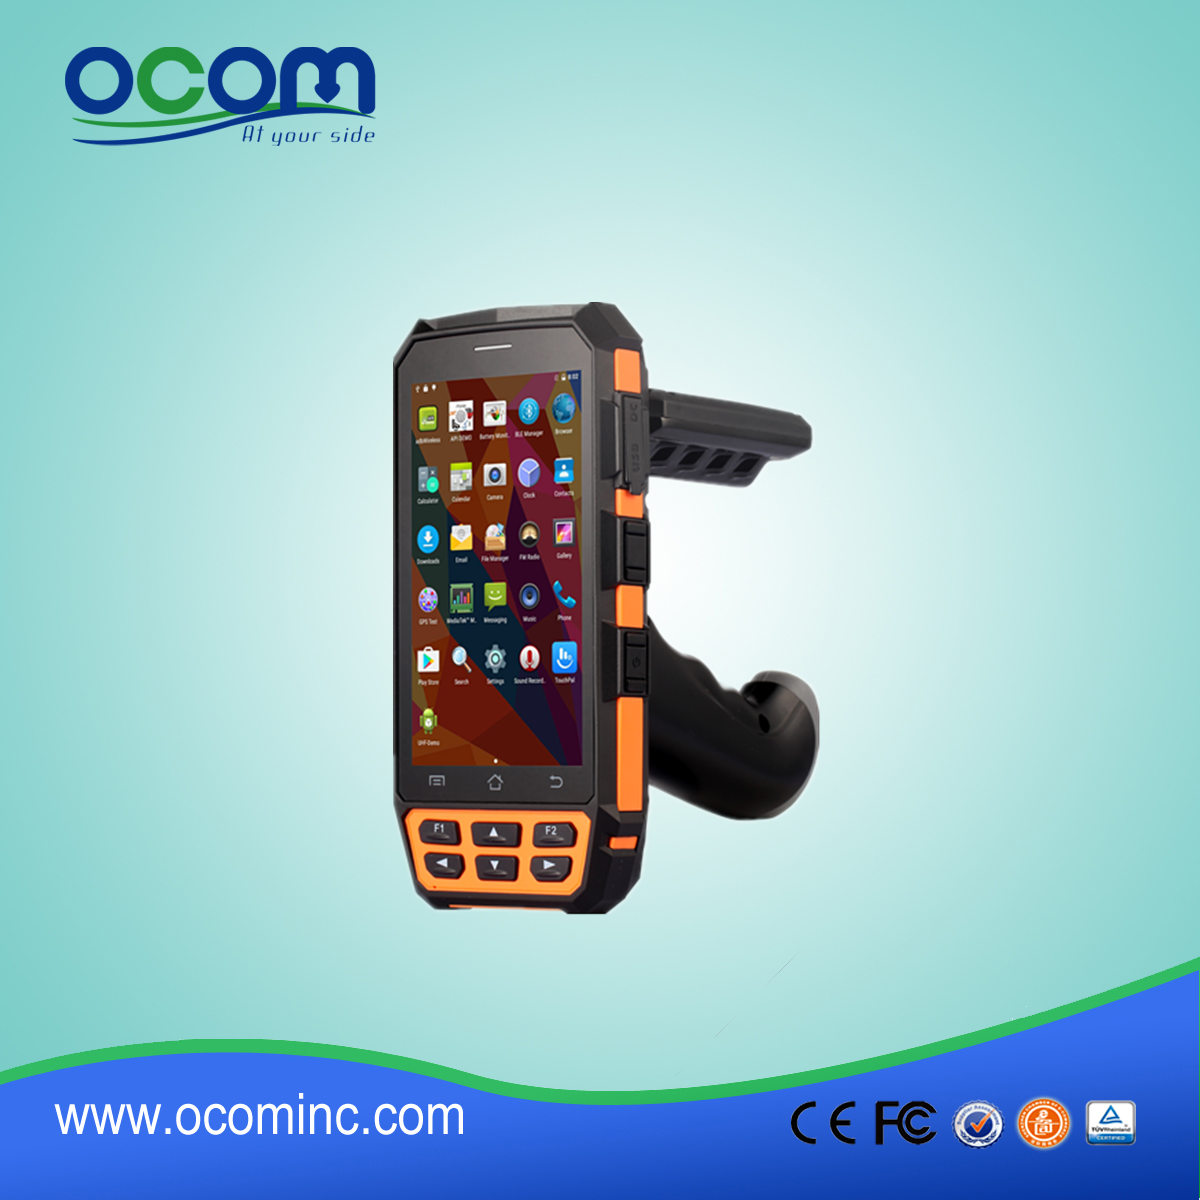 OCBS-D5000 Industrial Android IP65 Handheld Logistic PDA with Handel Grip